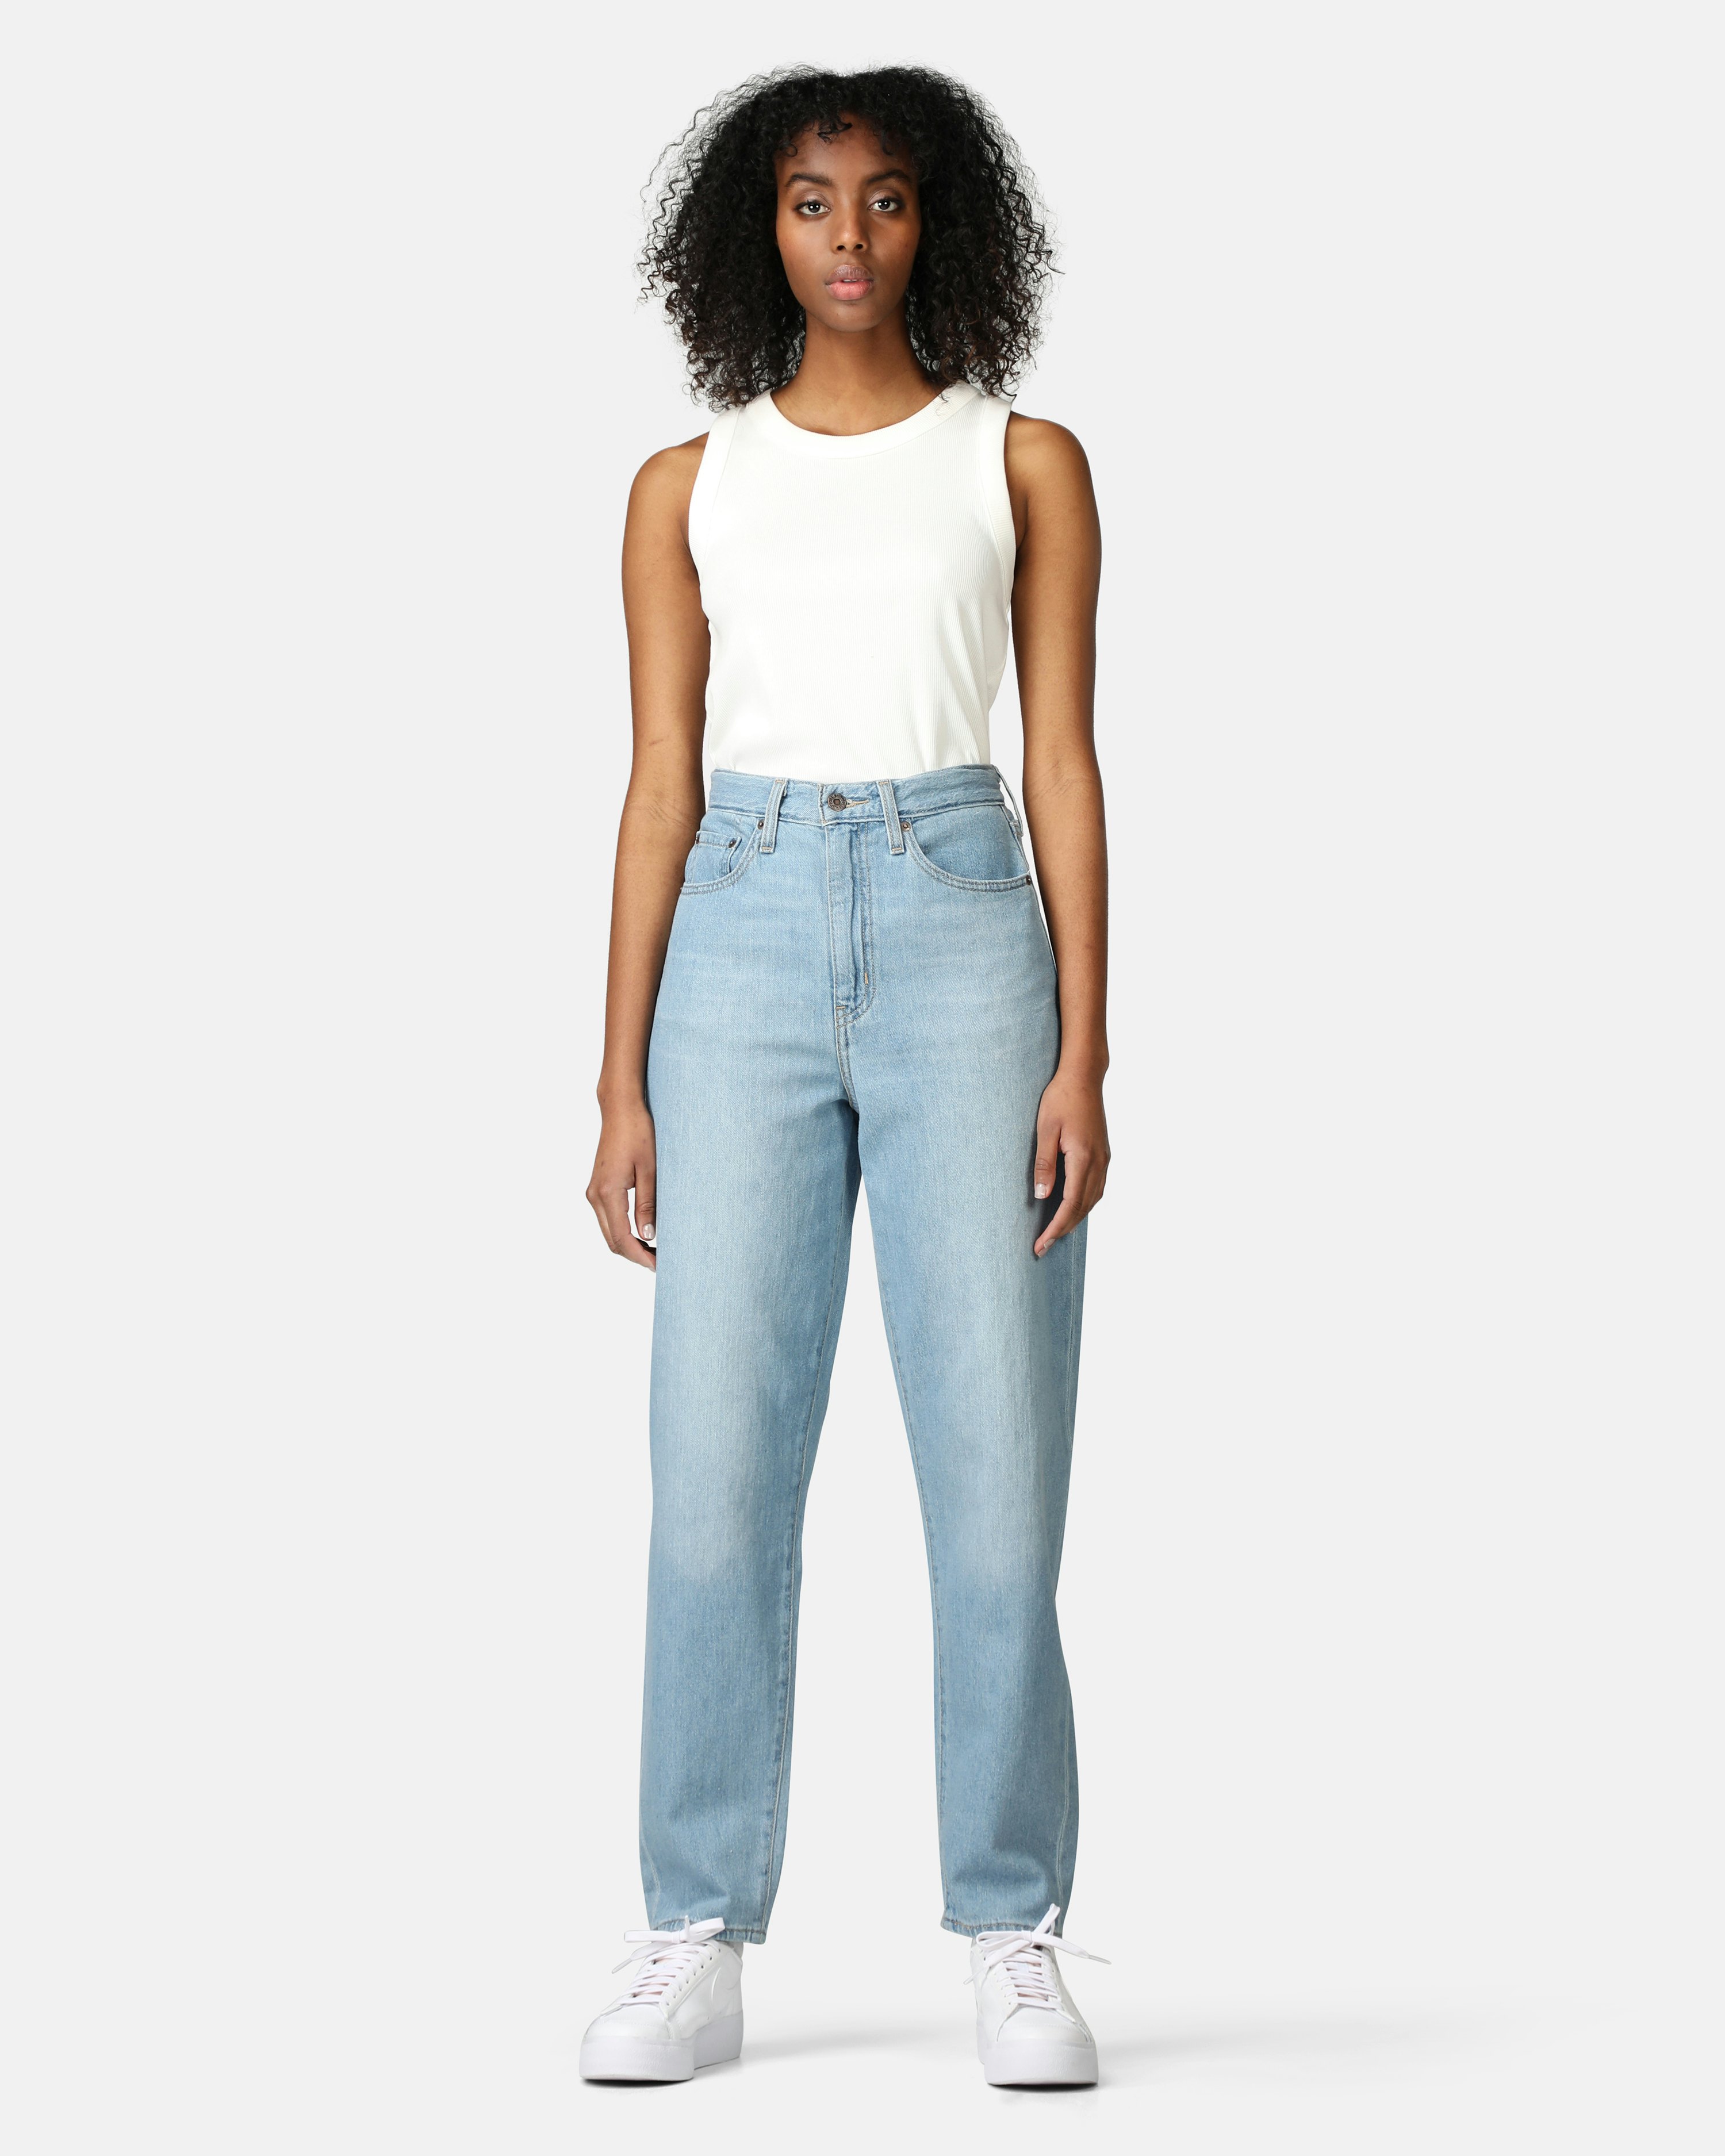 Levi’s Denim High Loose Taper - Let's Stay In